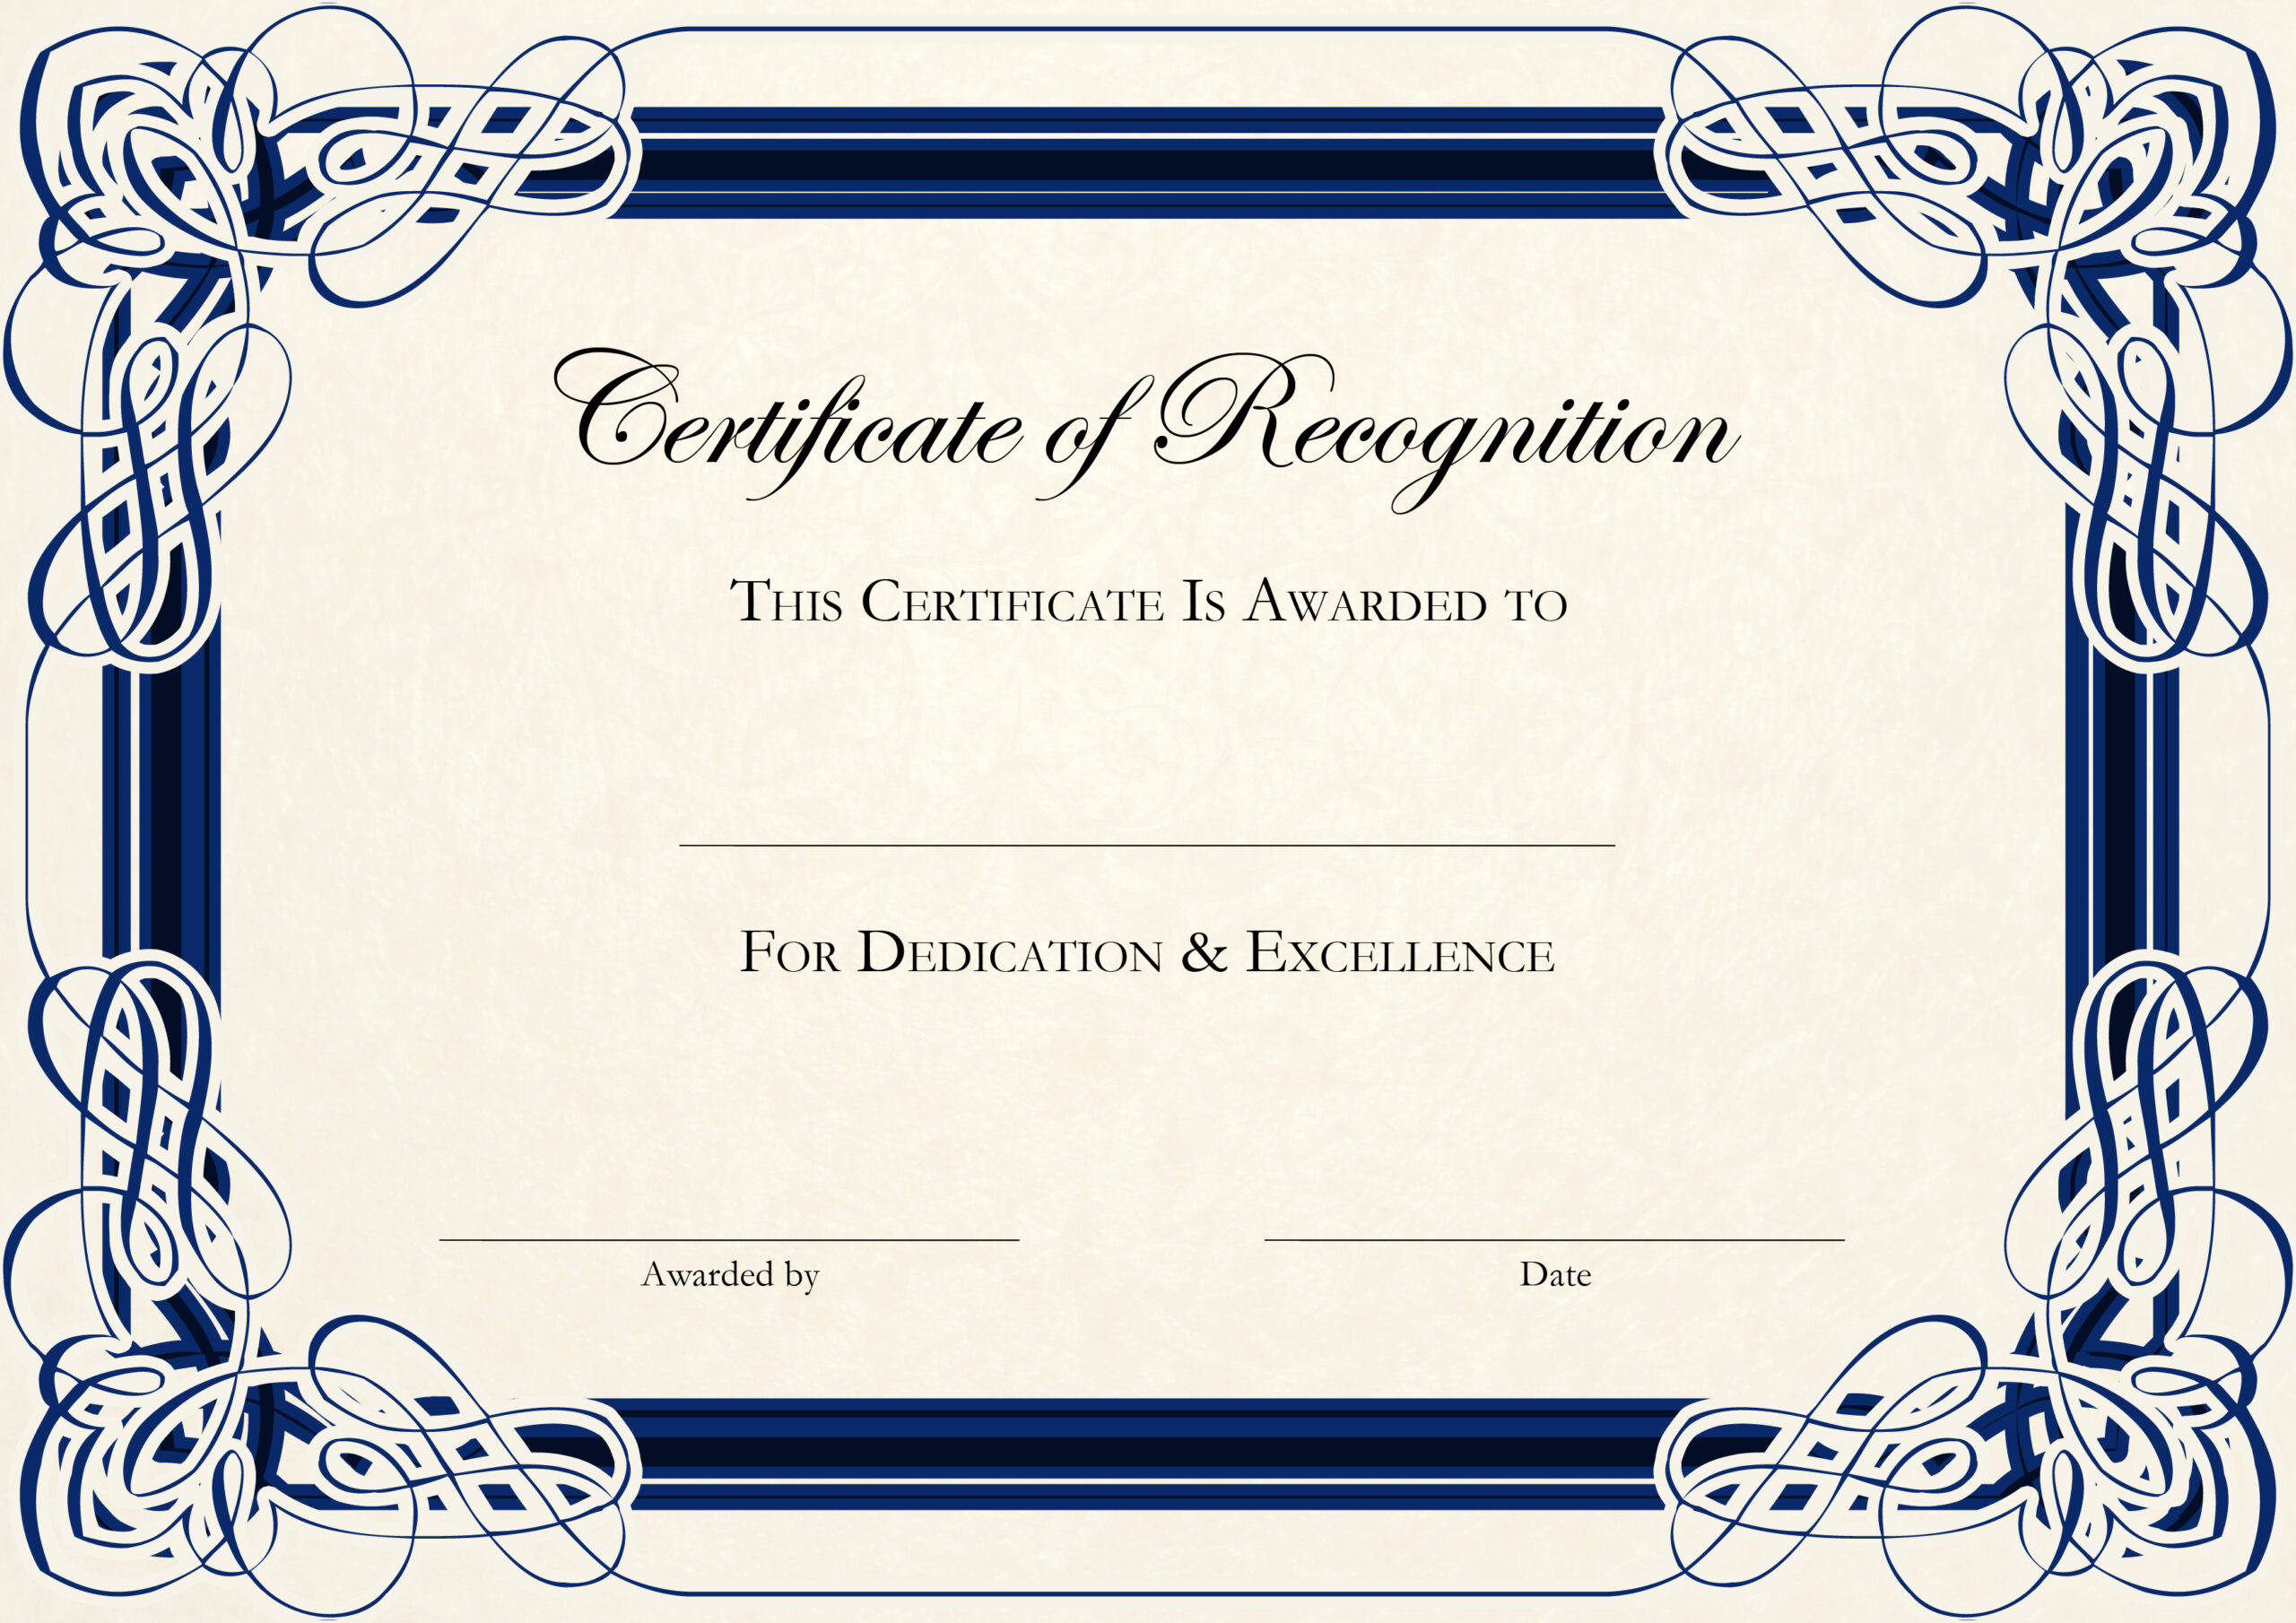 printable borders for certificate - Clip Art Library Within Downloadable Certificate Templates For Microsoft Word